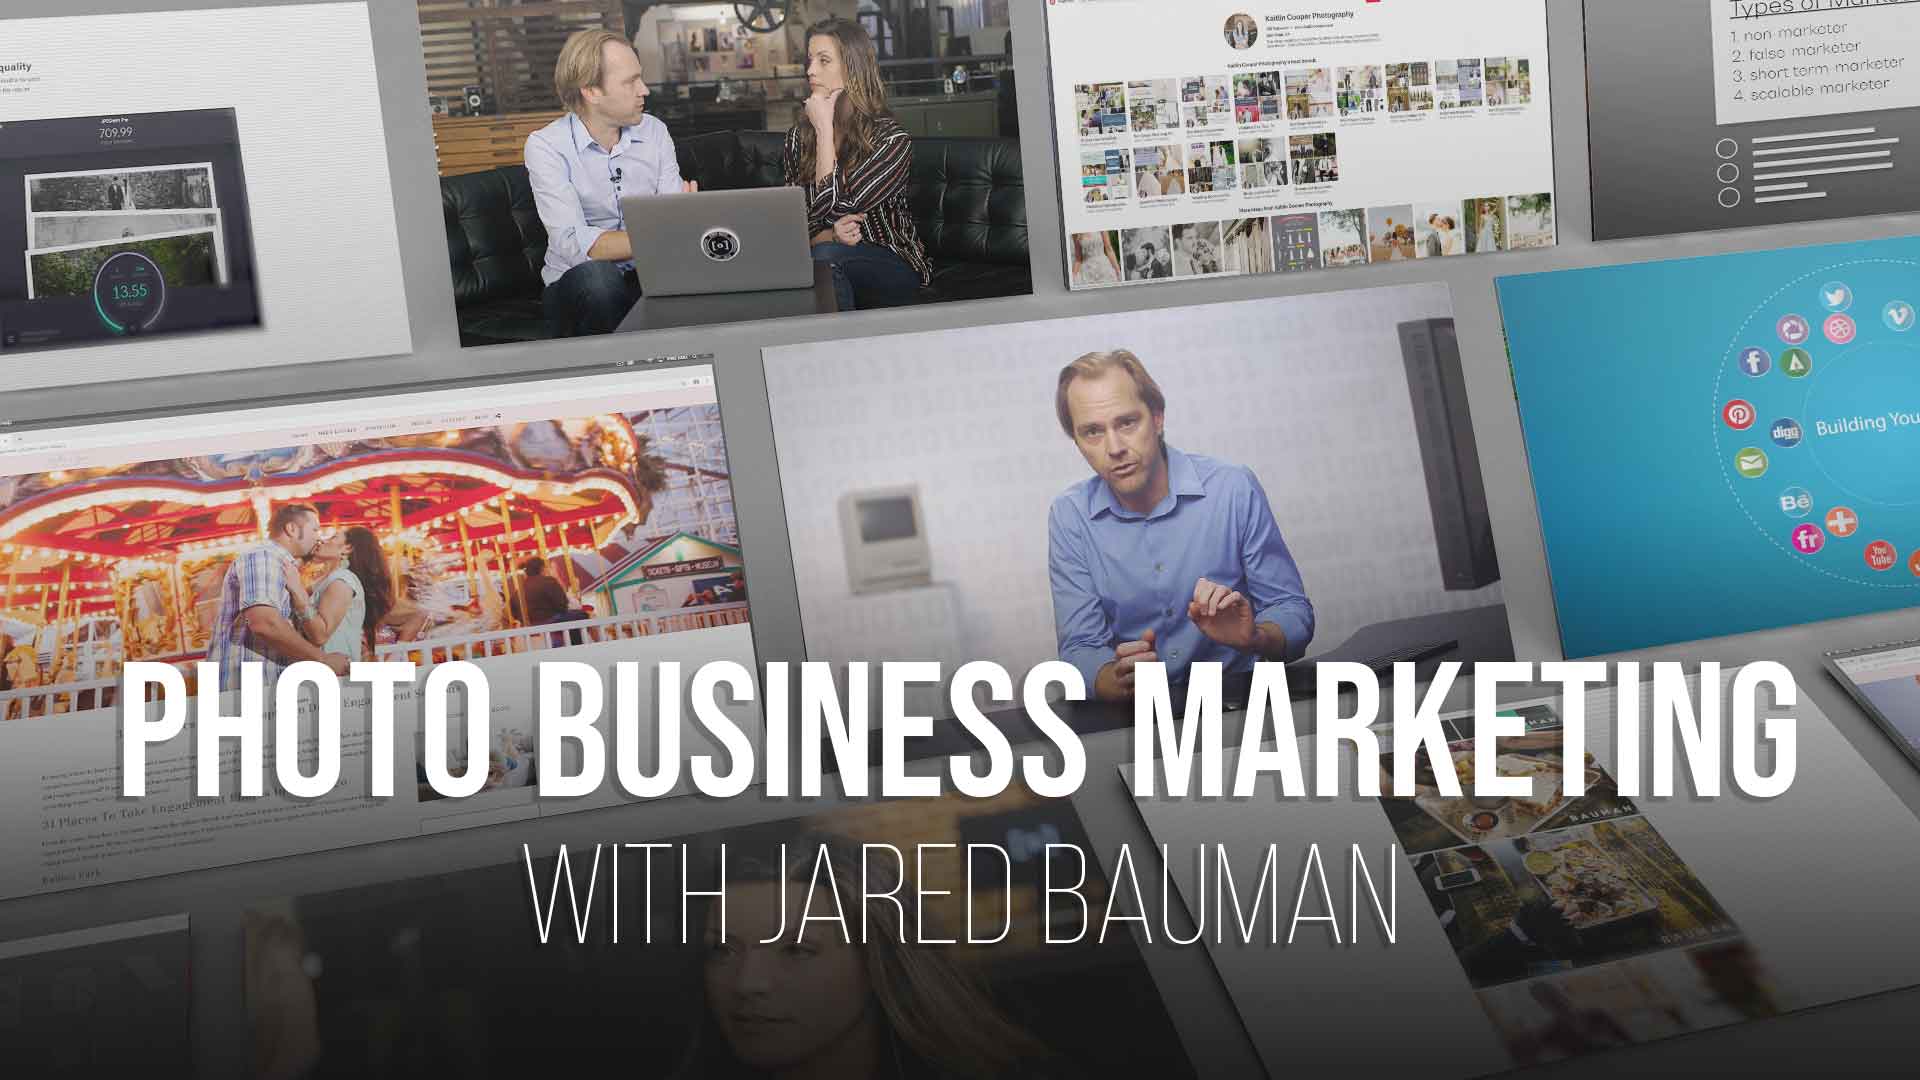 Jared Bauman teaches a PRO EDU tutorial on how to digitally market your photography business. Marketing a photography business is made clear with this PRO EDU course.